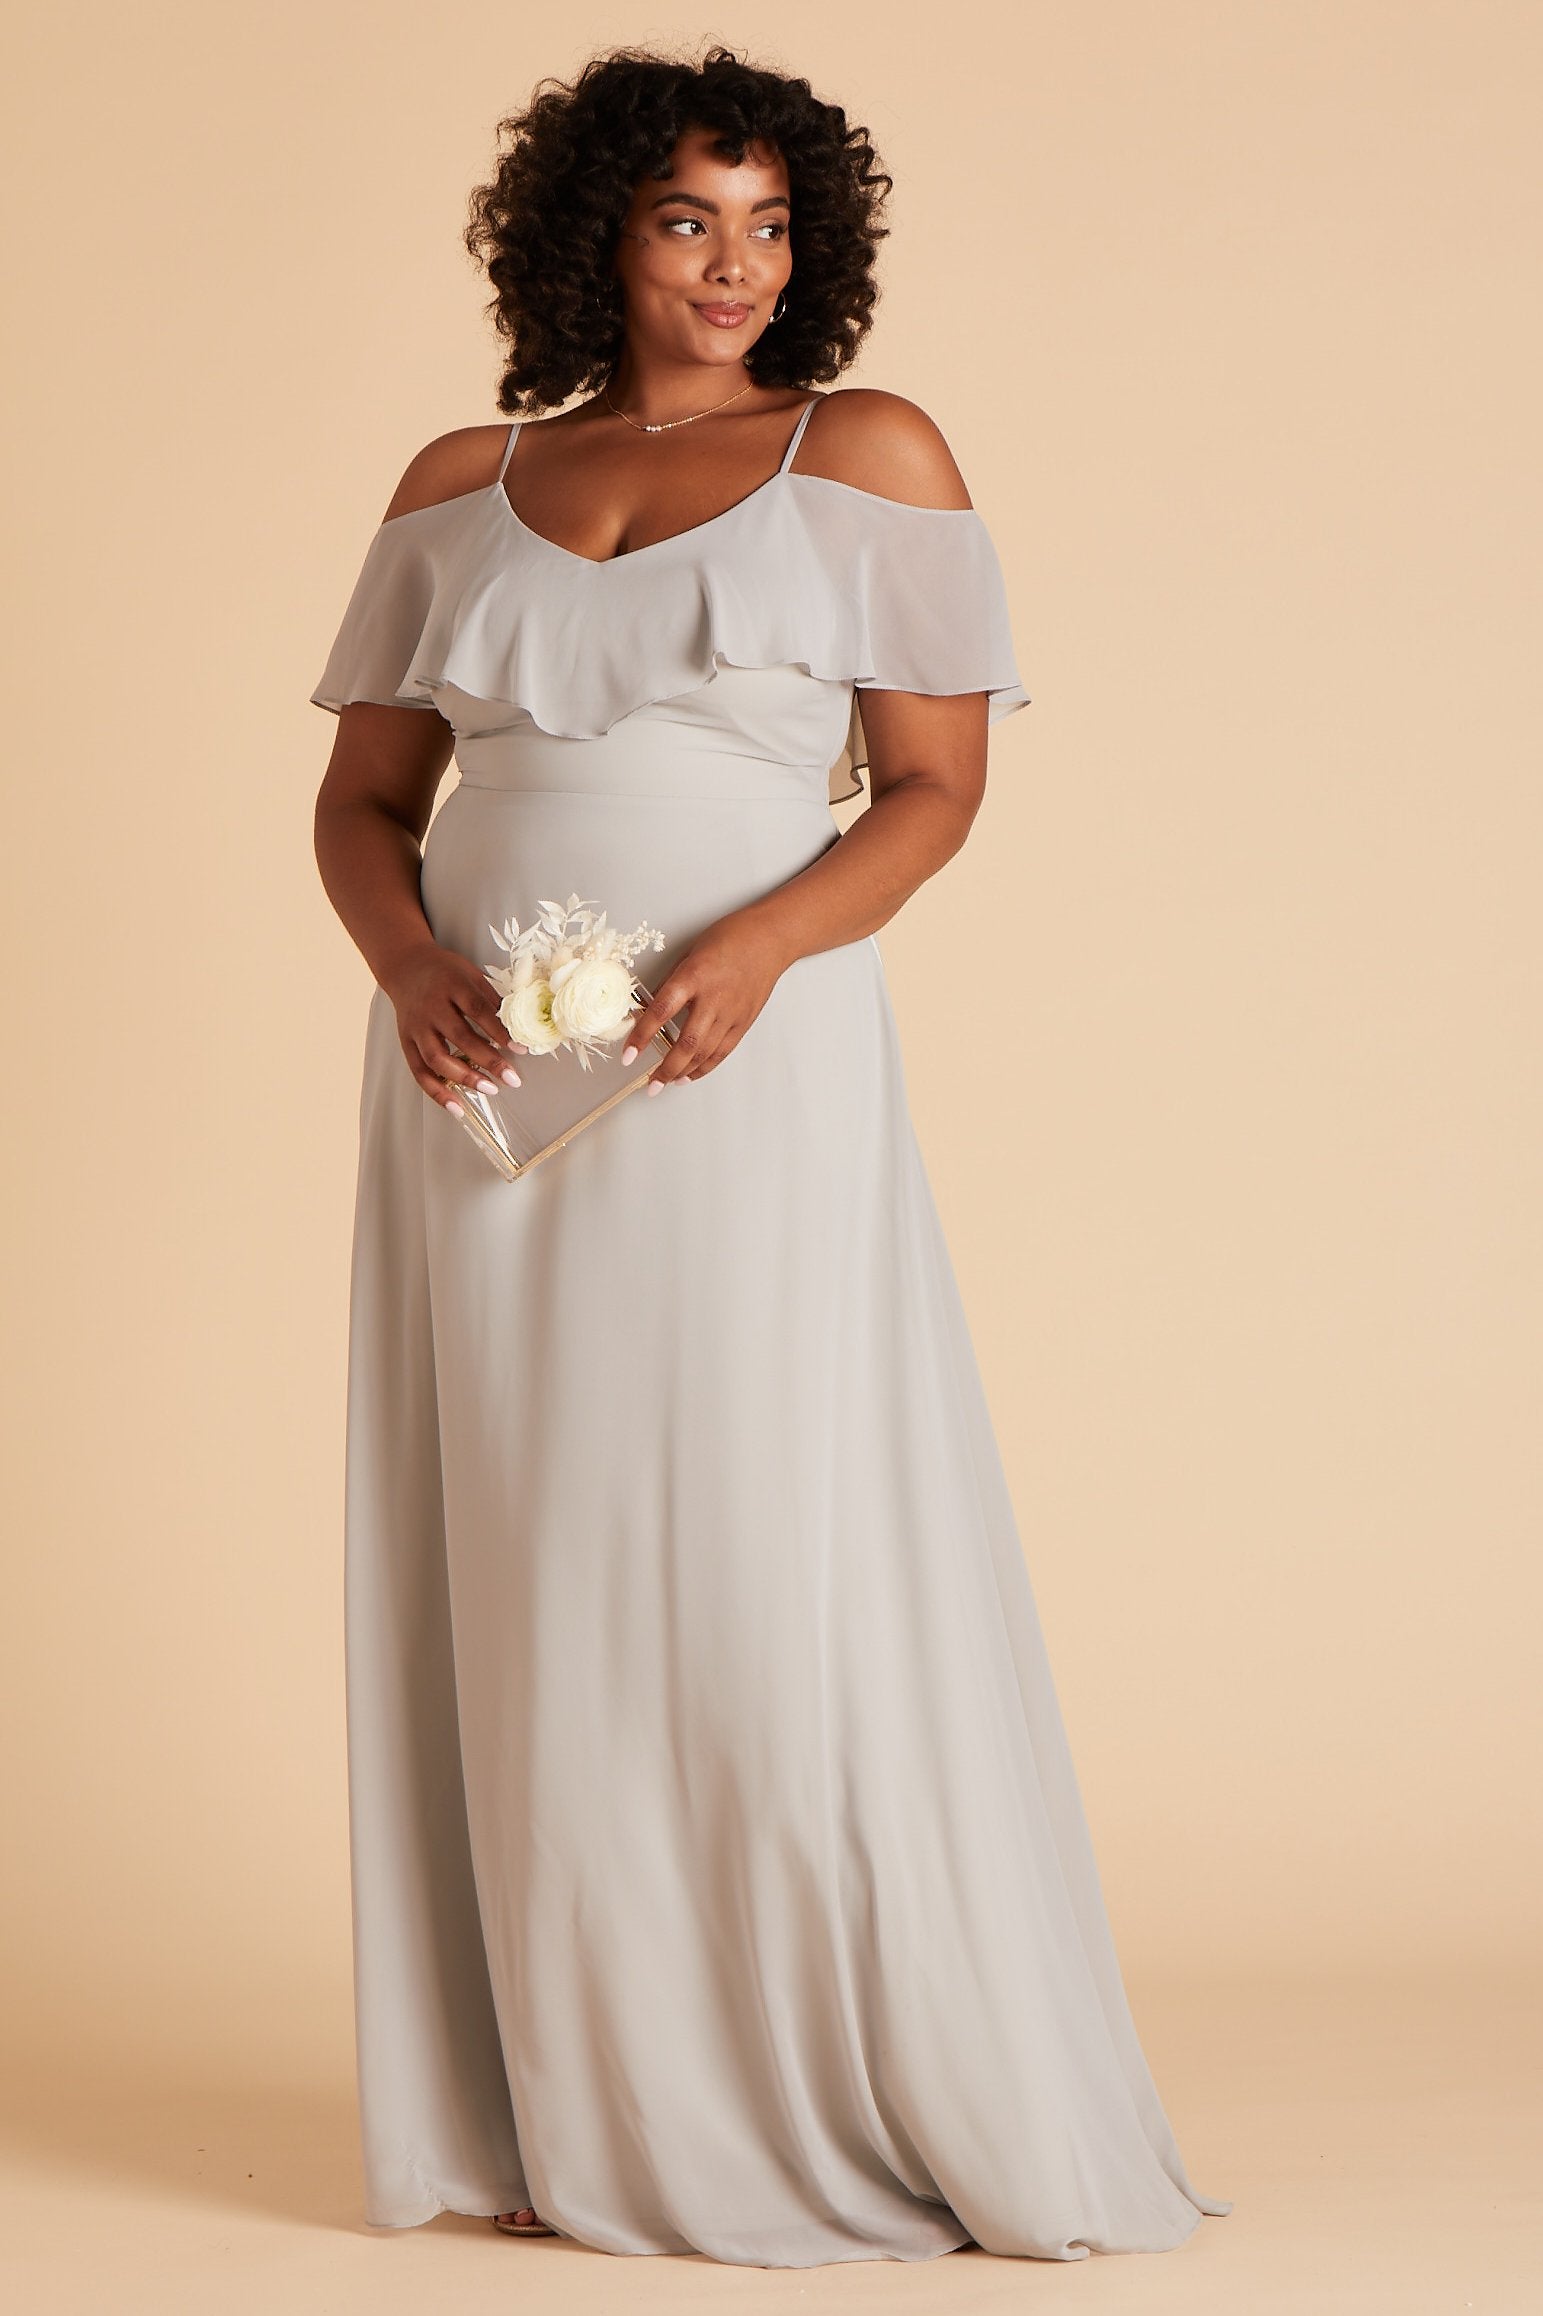 Jane convertible plus size bridesmaid dress in dove gray chiffon by Birdy Grey, front view